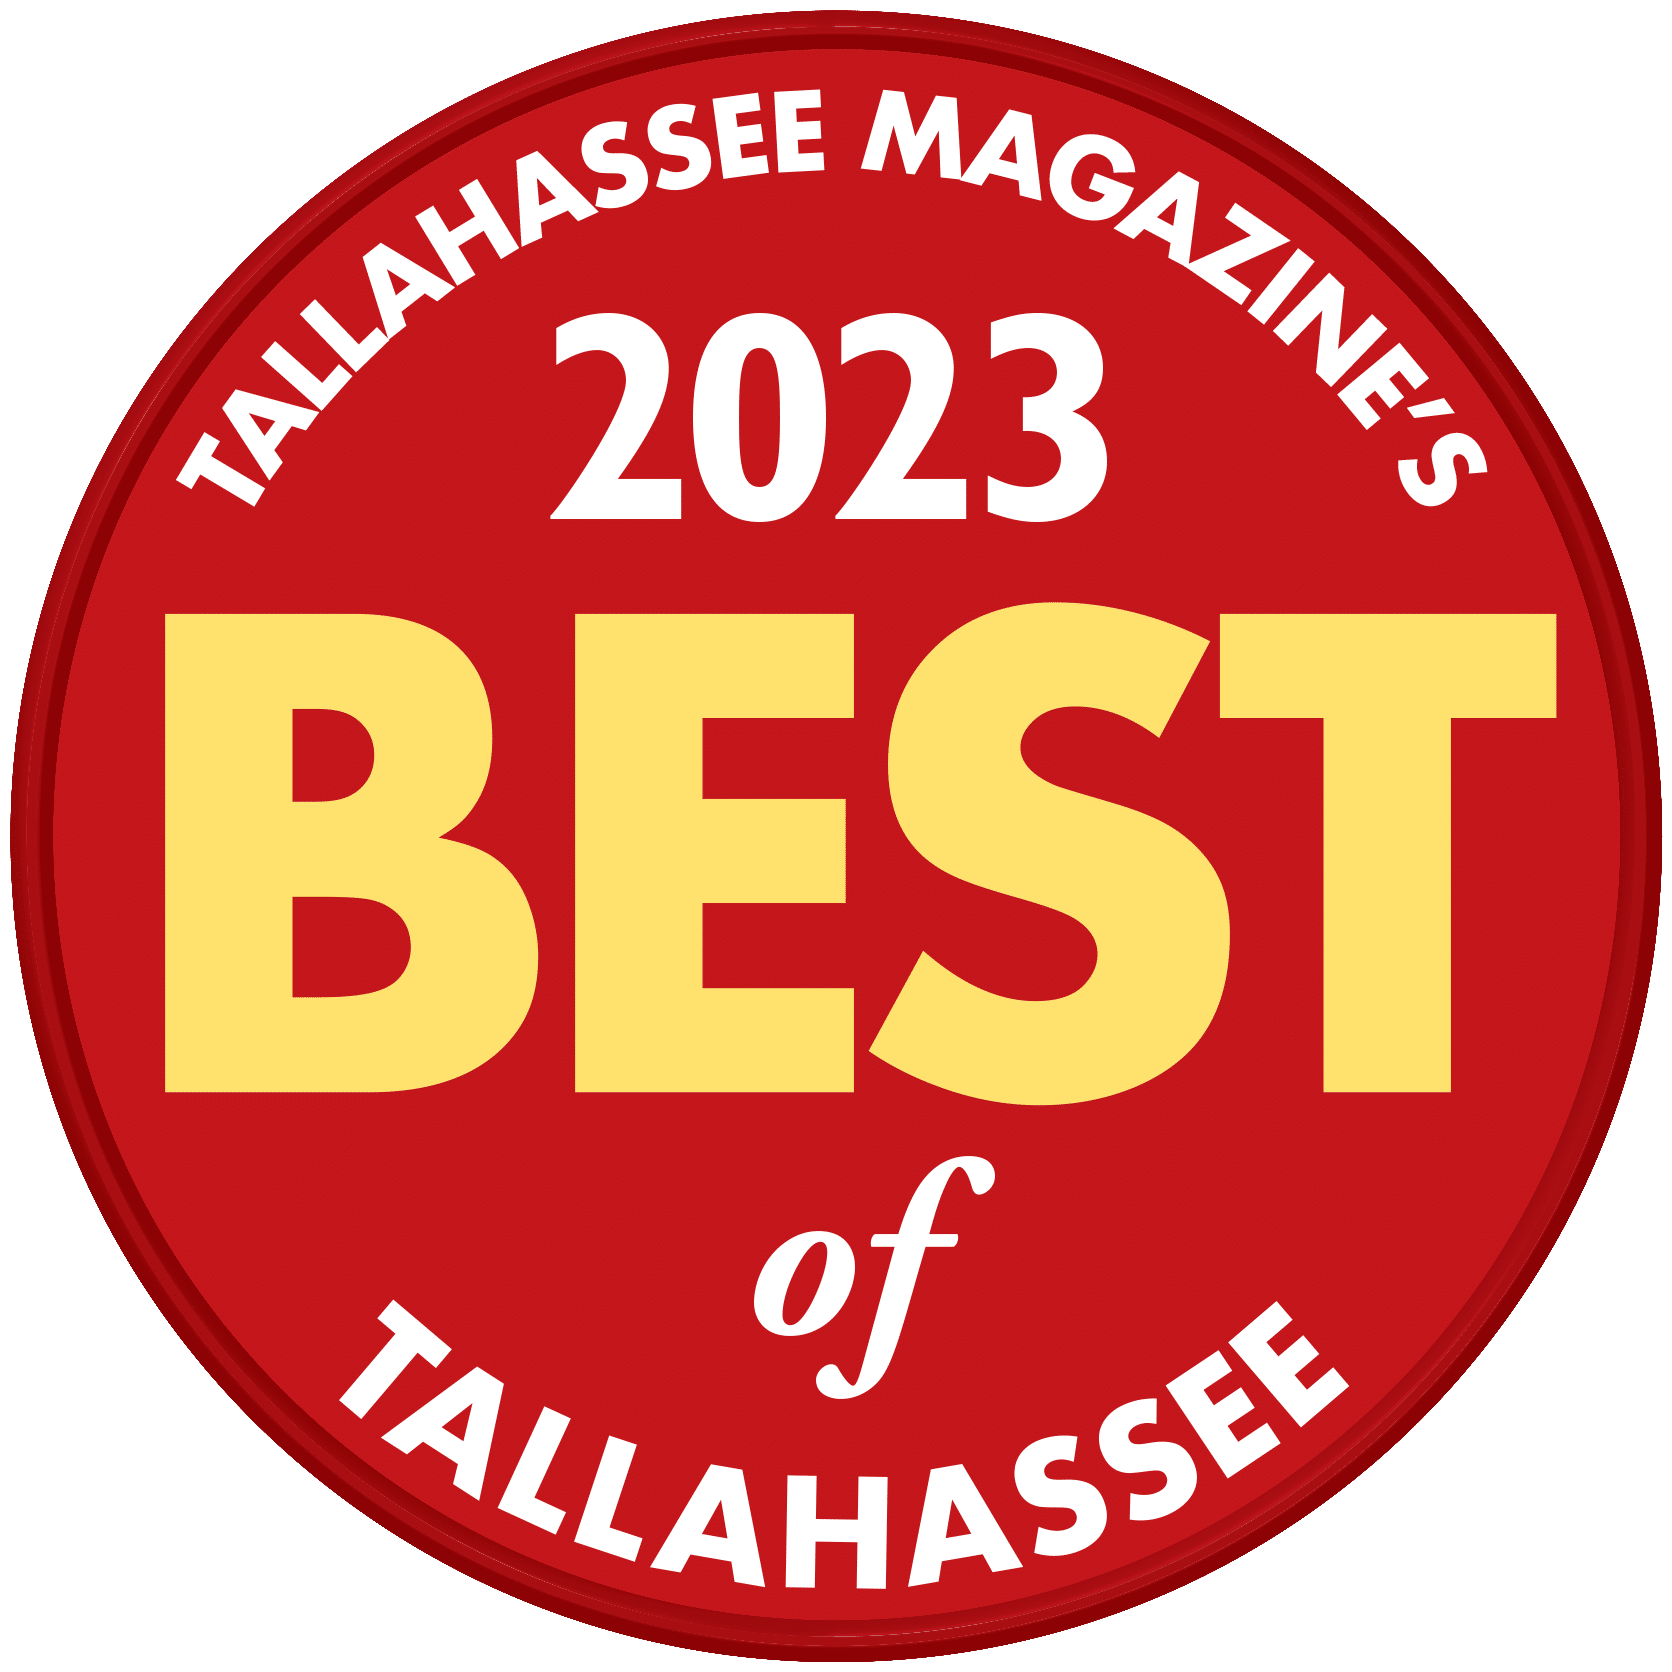 Tallahassee Orthopedic Center - Best of Tallahassee